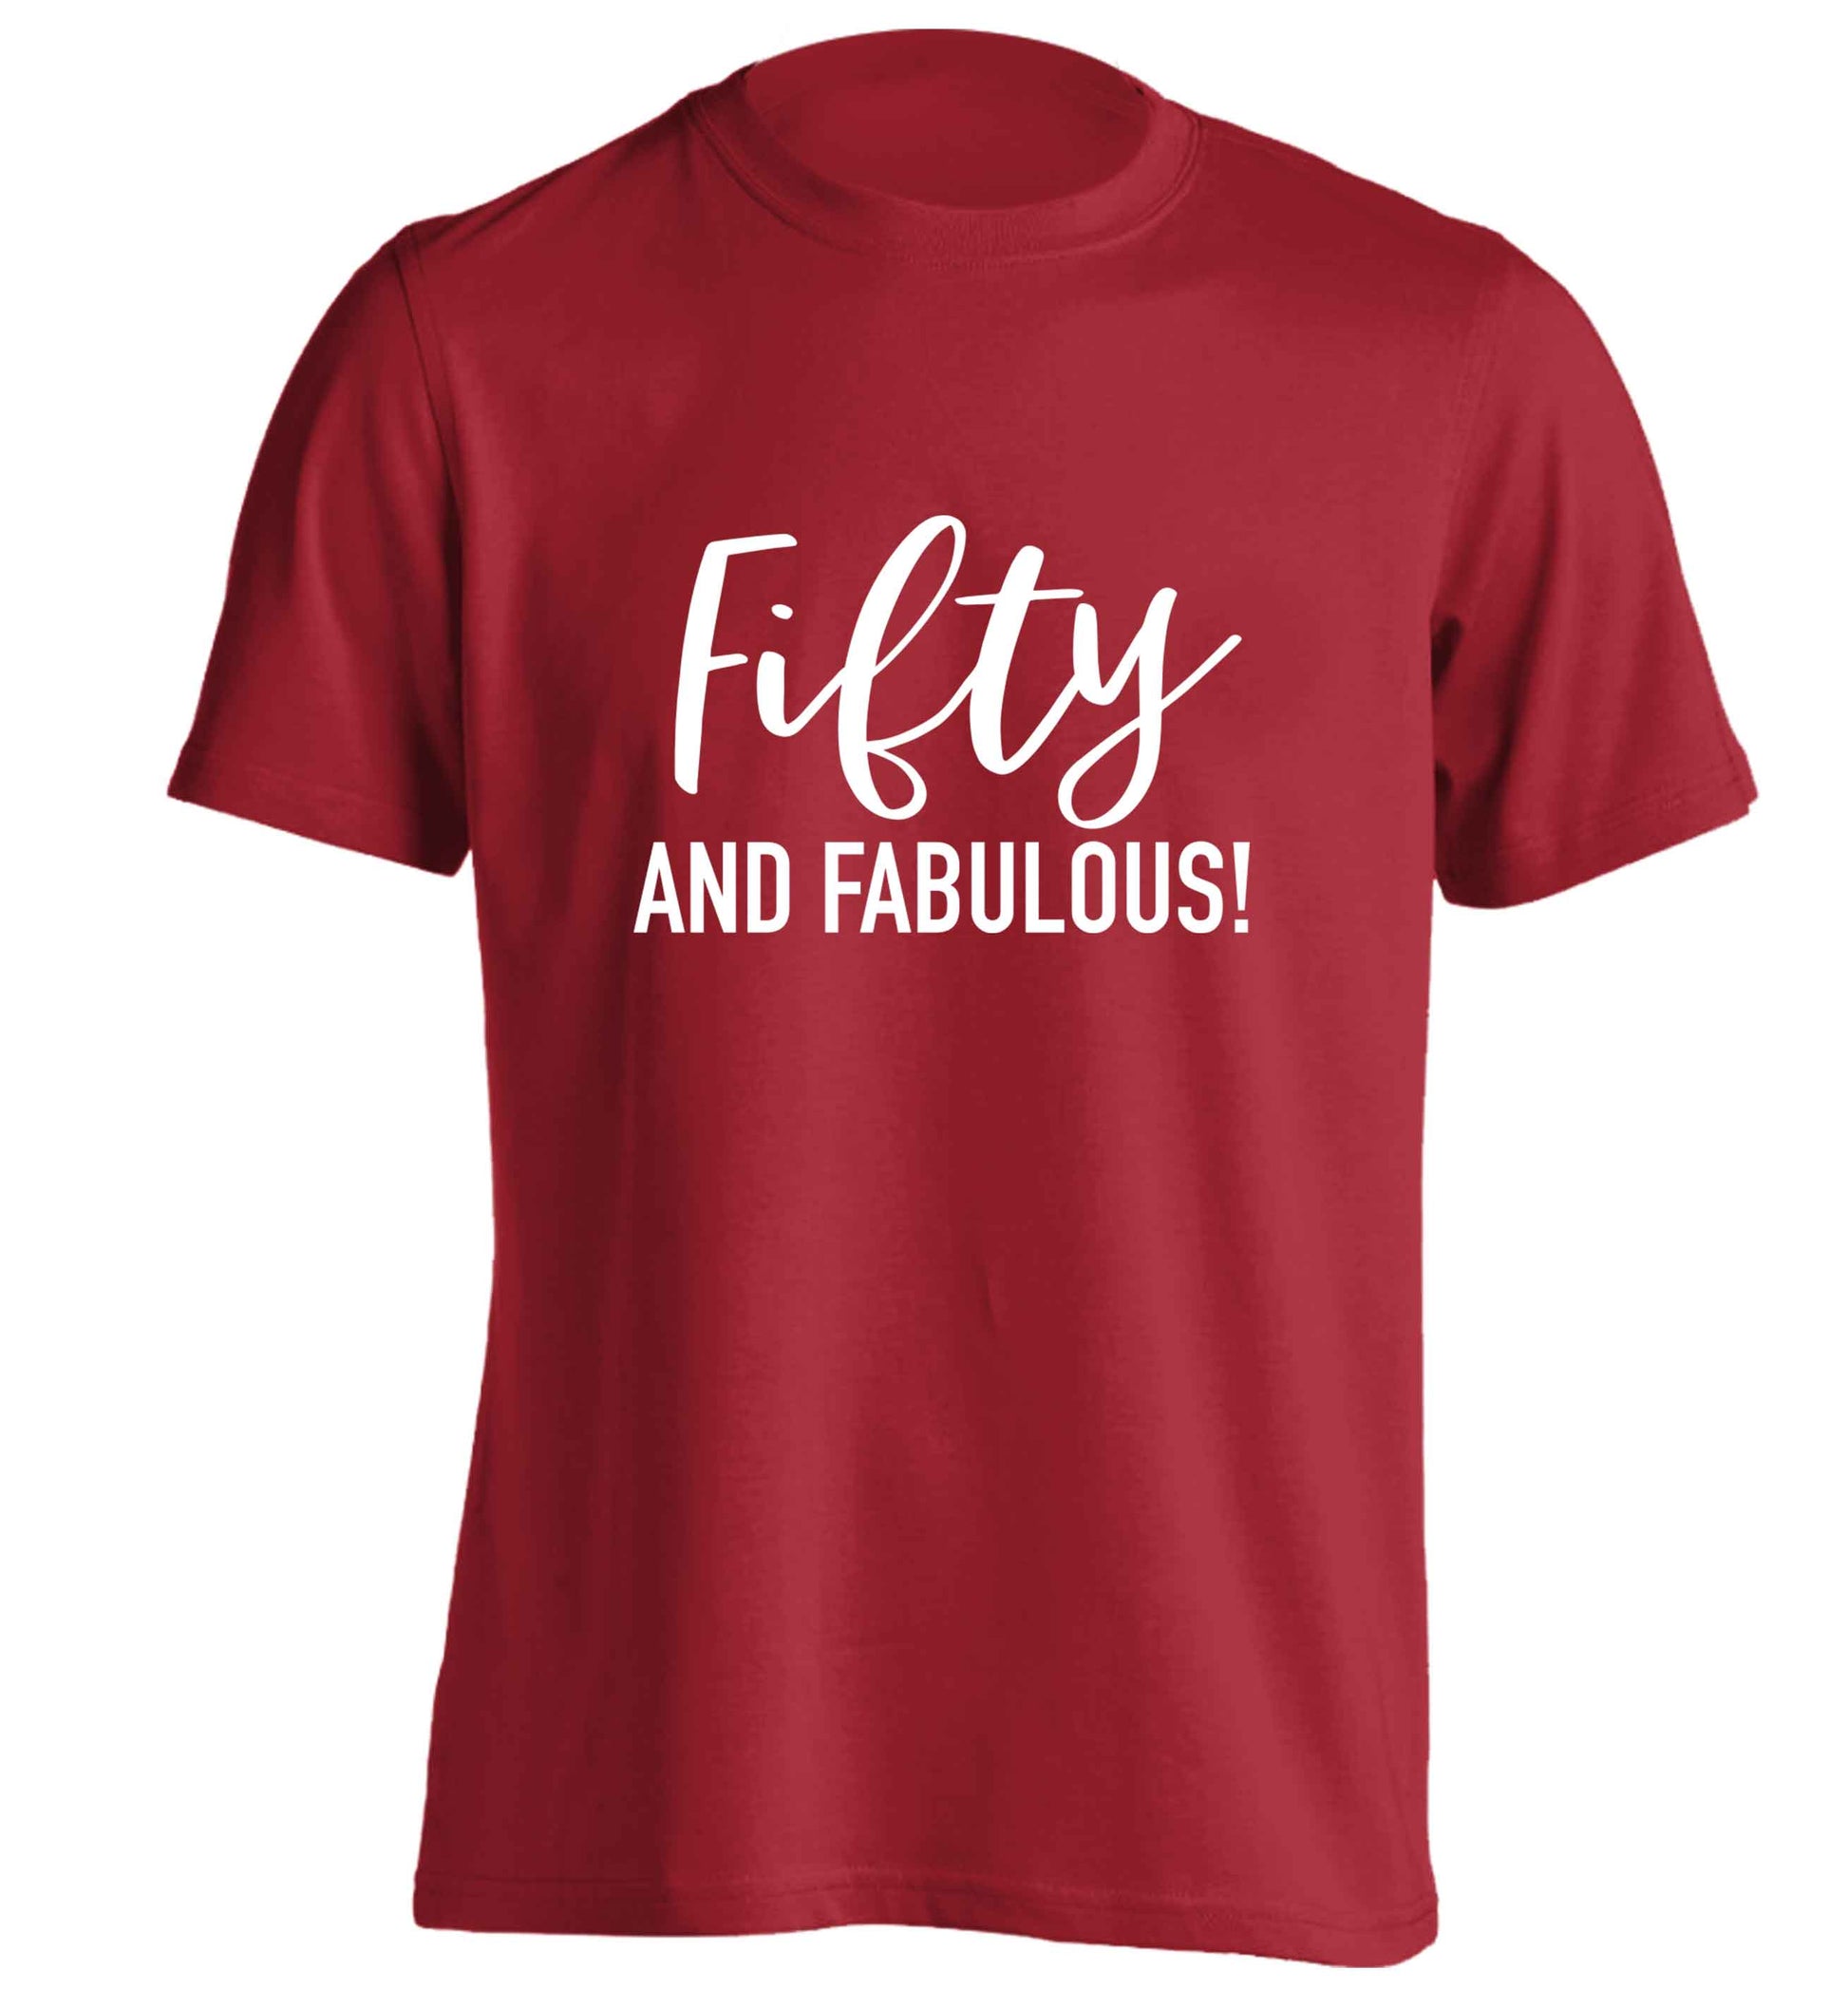 Fifty and fabulous adults unisex red Tshirt 2XL